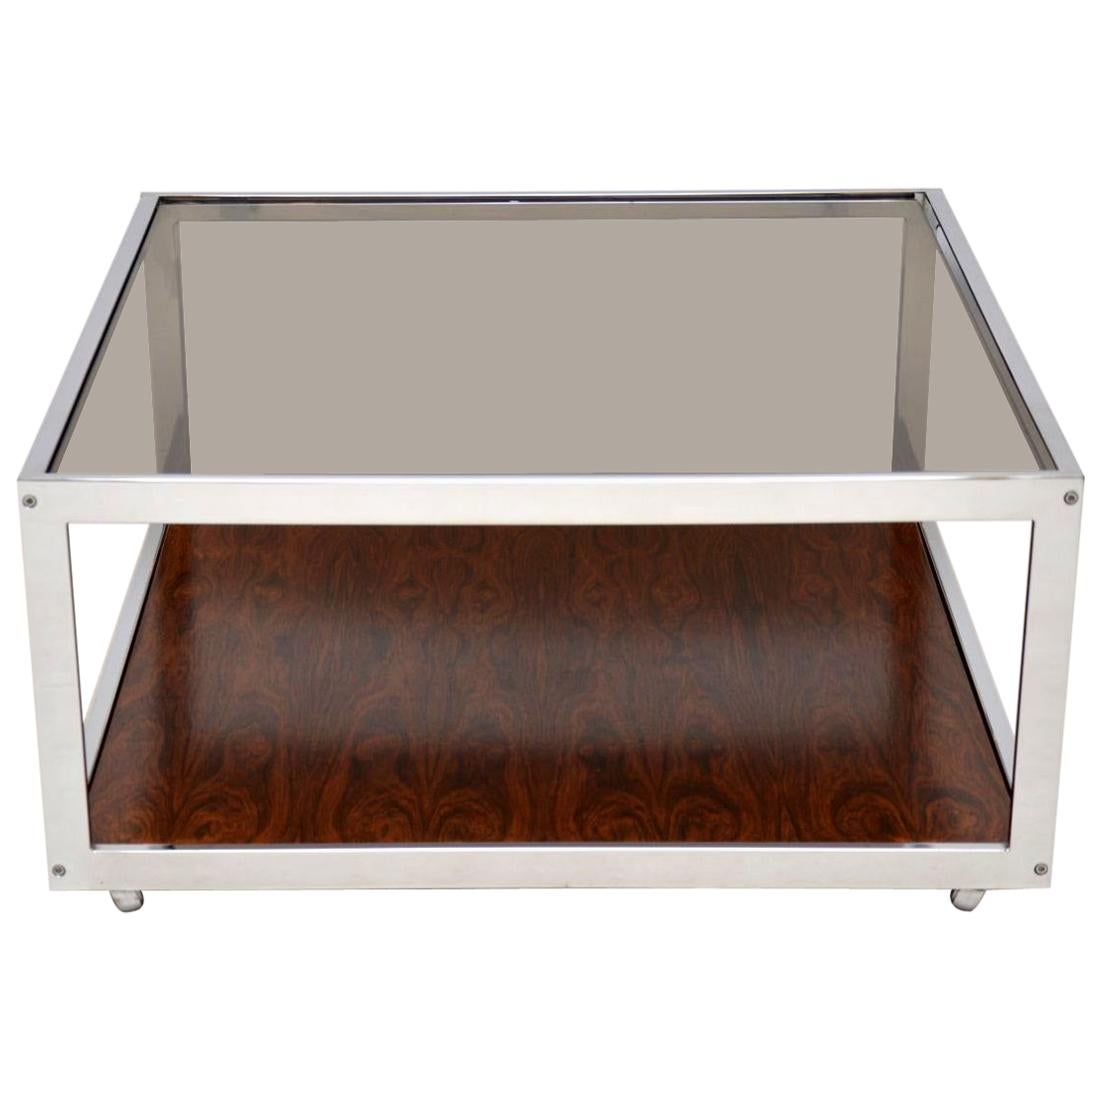 1970s Vintage Chrome Coffee Table by Howard Miller Associates